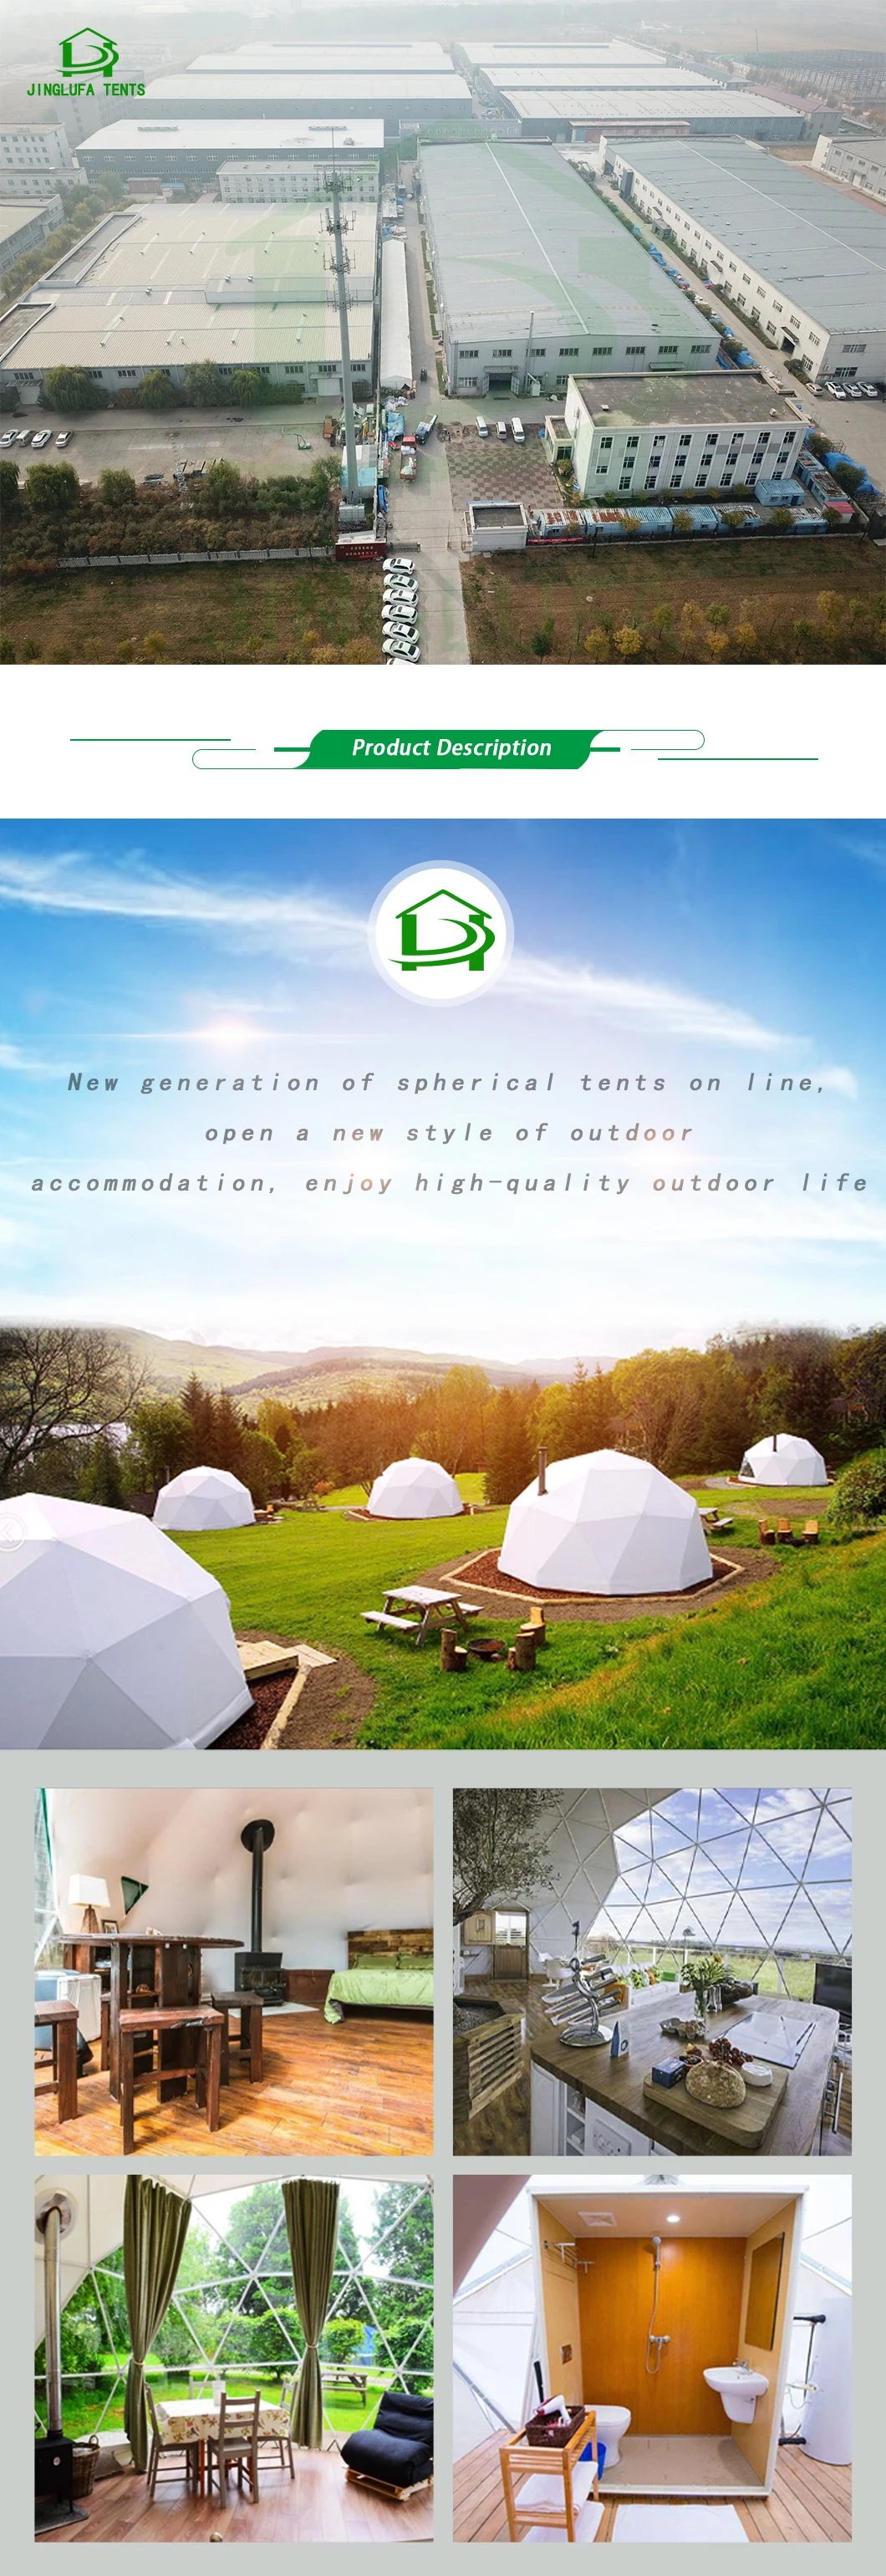 5m Glamping Camping Tent Waterproof PVC Luxury Hotel Dome Tent